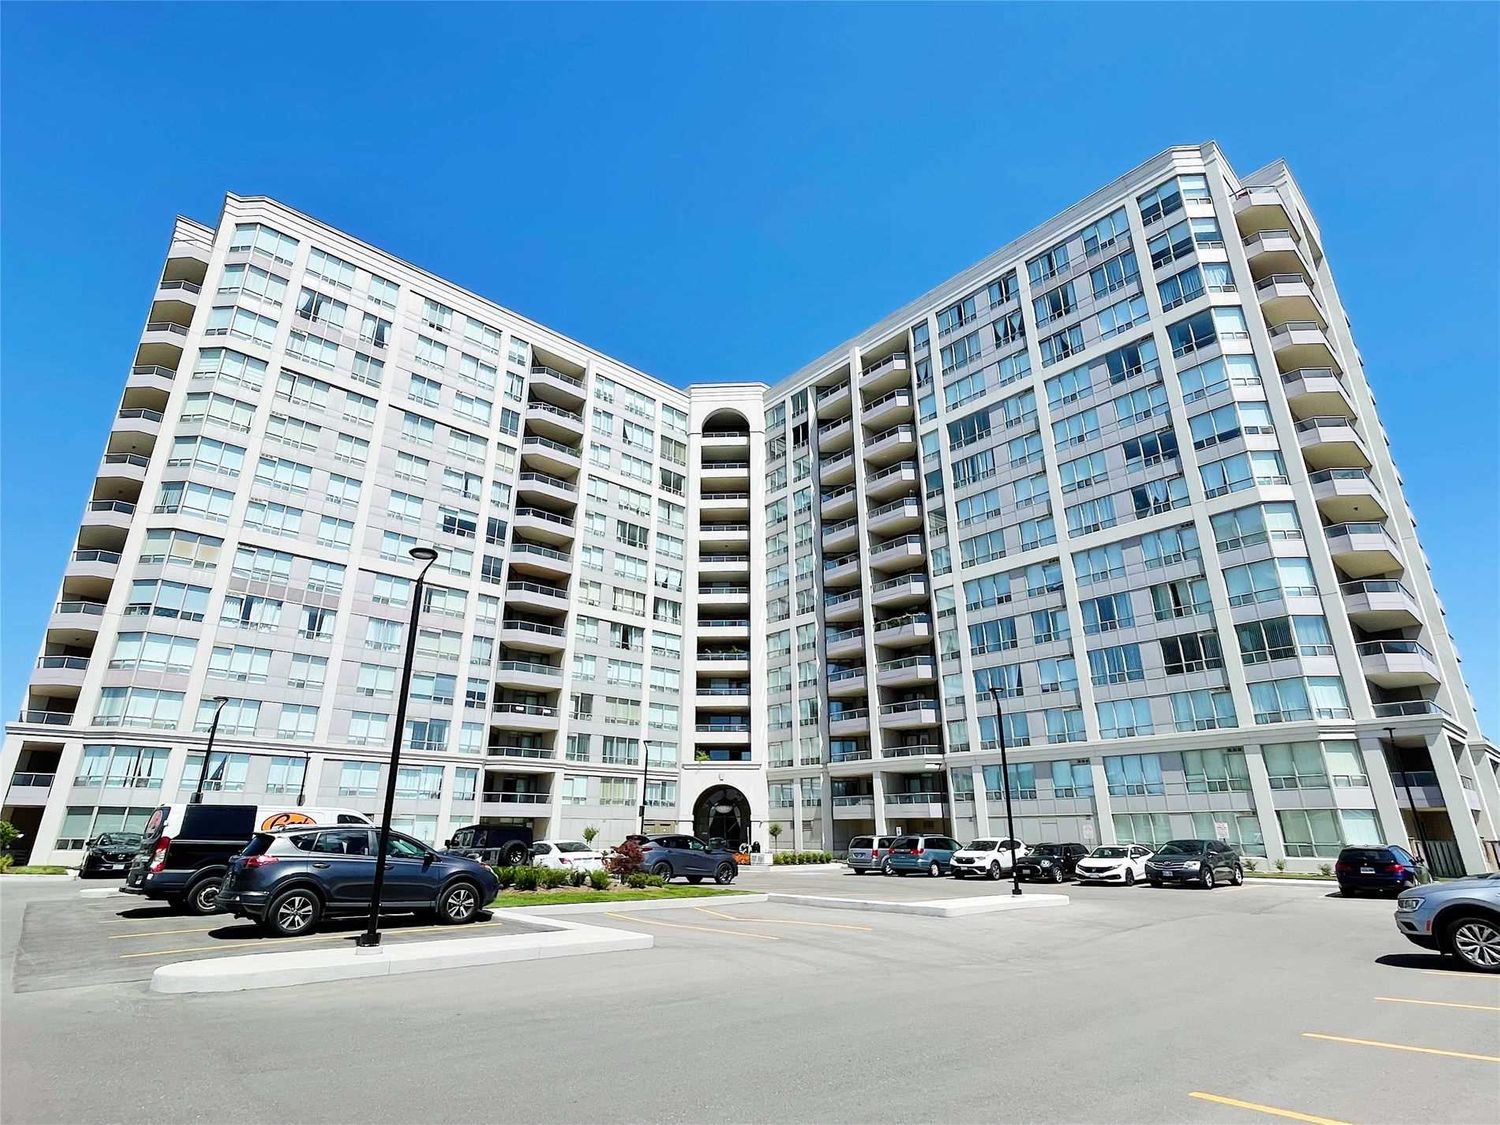 9017 Leslie Street. Grand Parkway II Condos is located in  Richmond Hill, Toronto - image #2 of 2